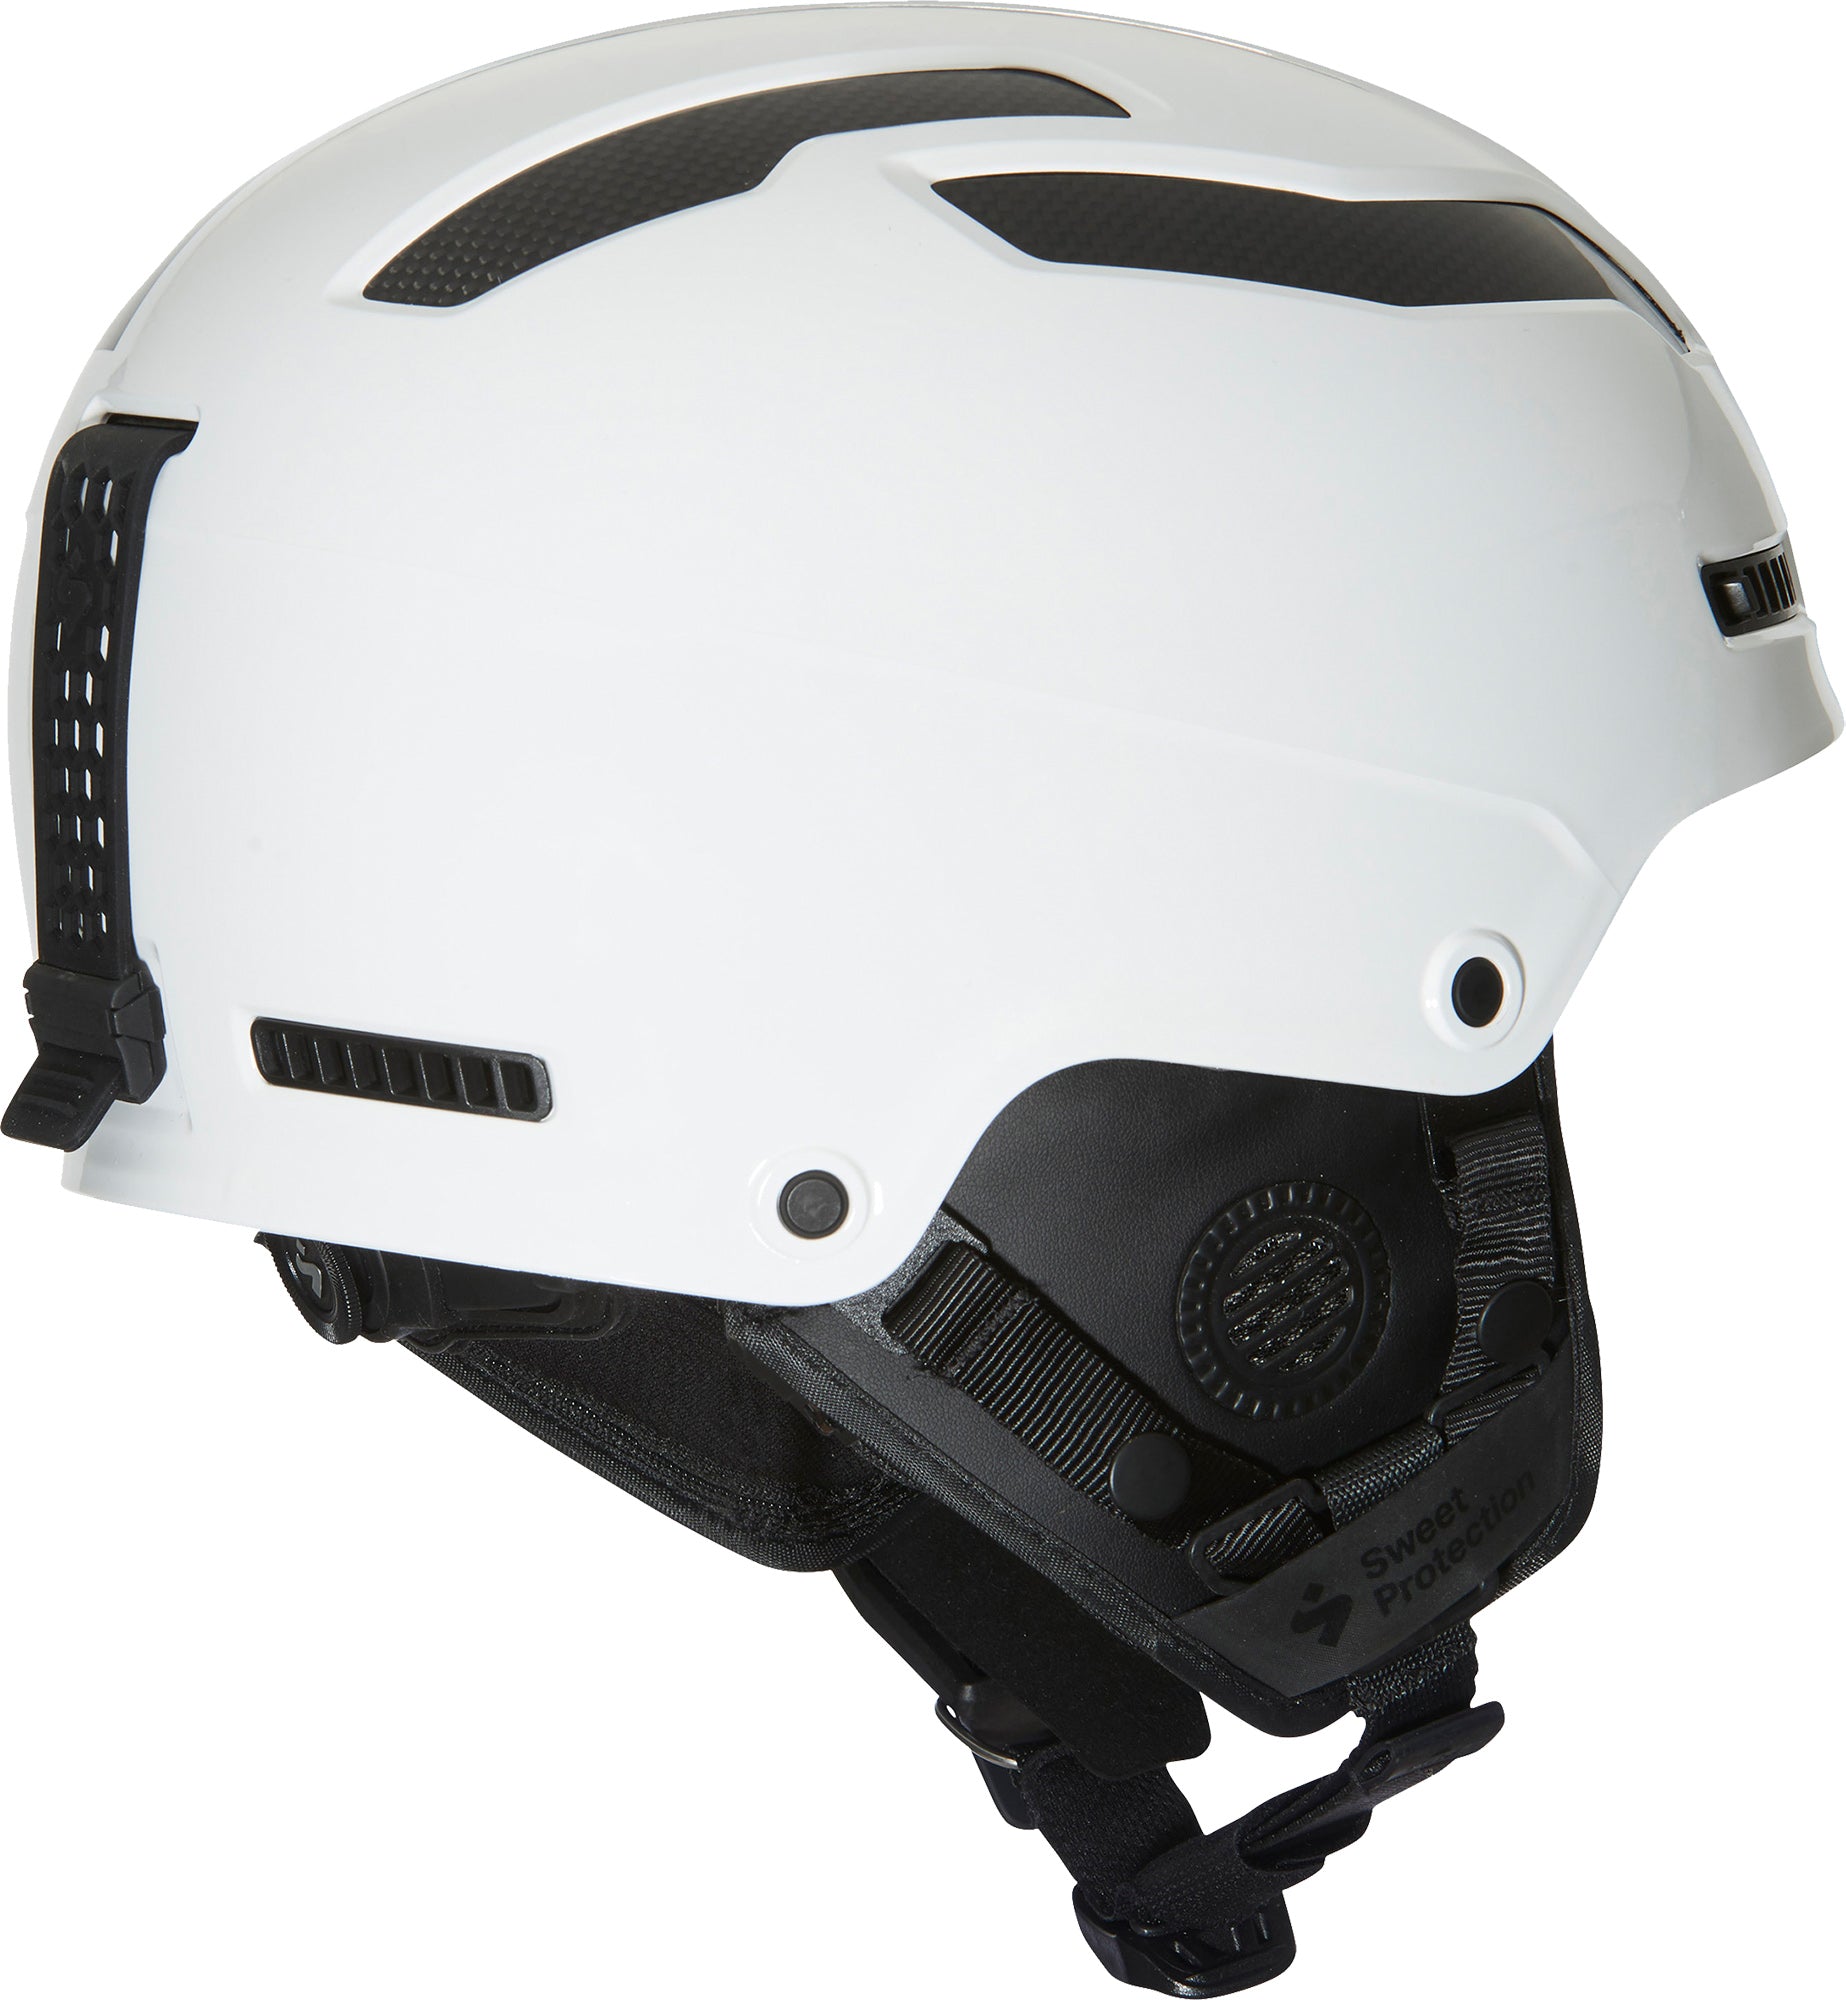 Sweet Protection Looper MIPS - Casque ski homme